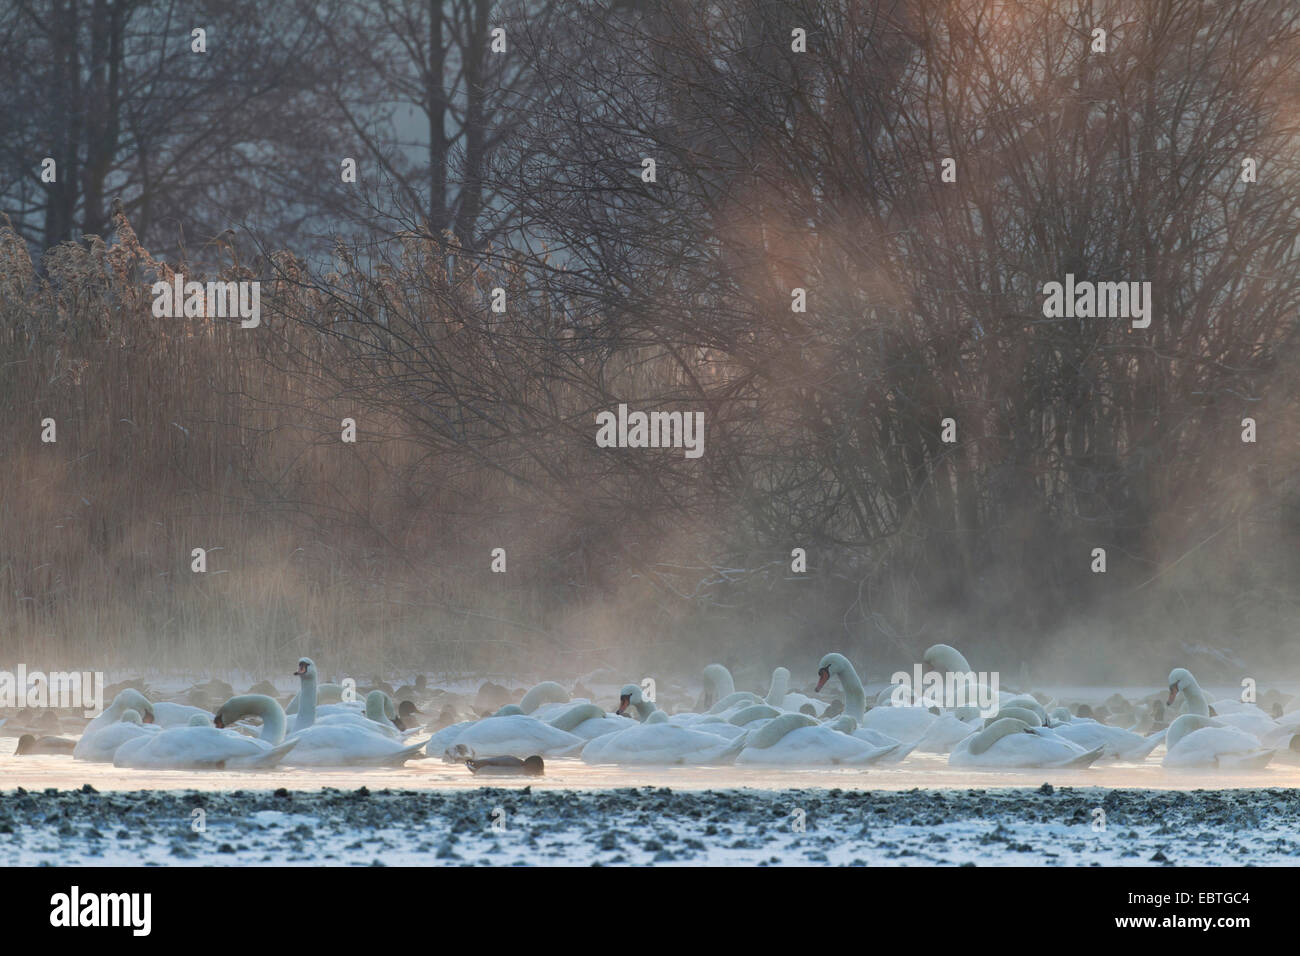 mute swan (Cygnus olor), in large number on a lake in the morning mist together with other water birds, Germany, Saxony, Oberlausitz Stock Photo